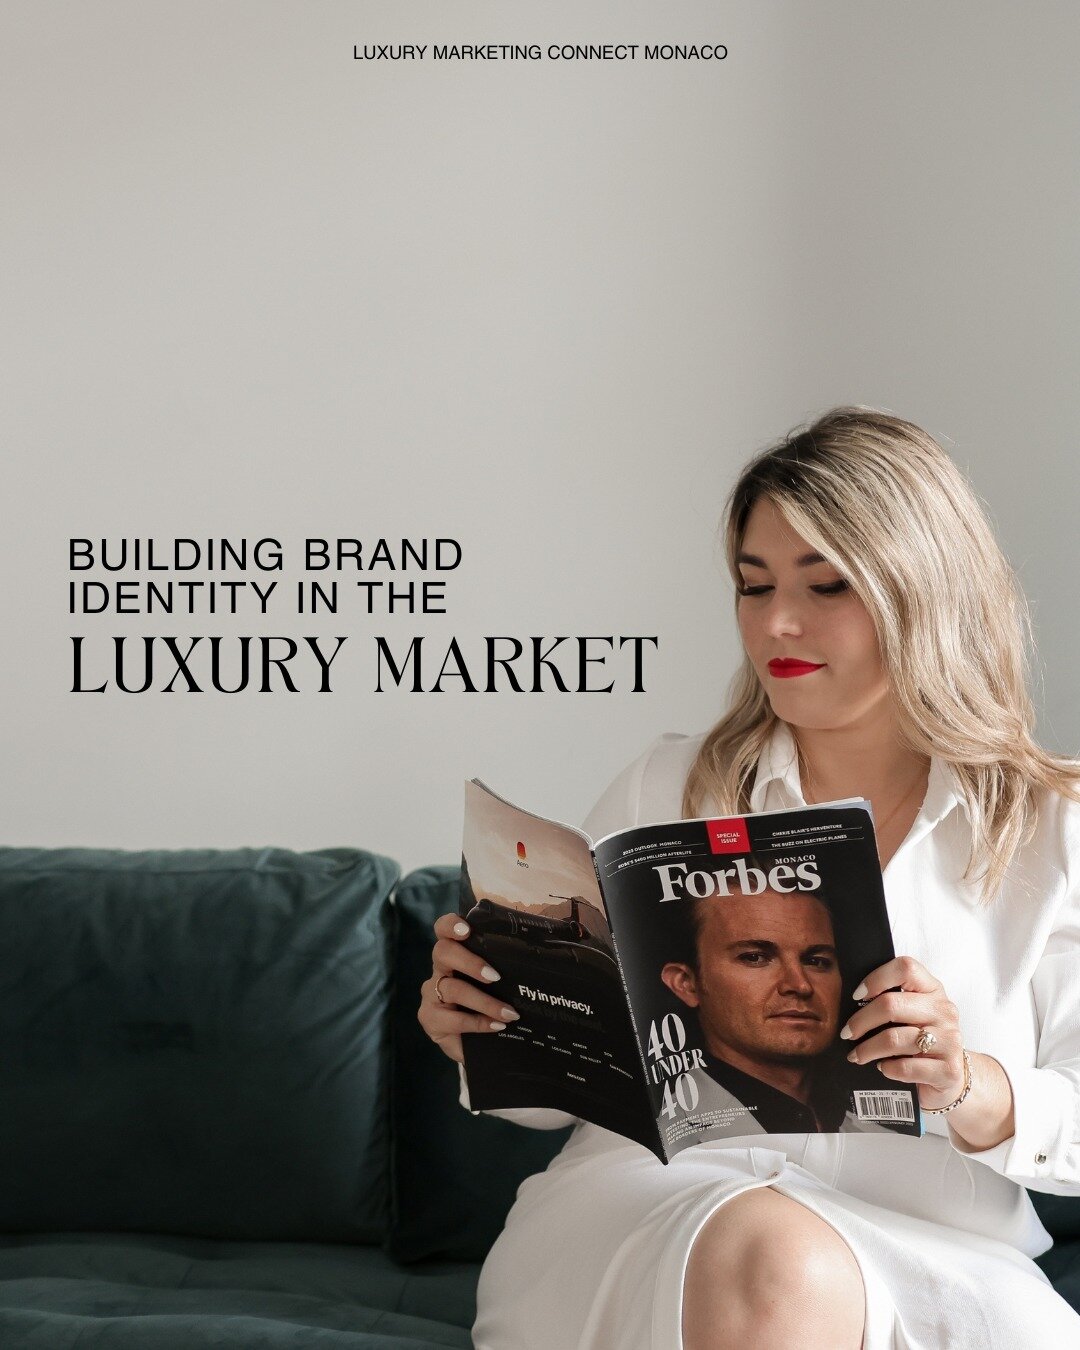 When building brand identity in the Luxury market, you necessarily have to create a PR strategy. 

We help brands to create a strong presence through PR in the Monaco and Cote d'Azur area, through securing articles, ads, sponsorships on events, and m